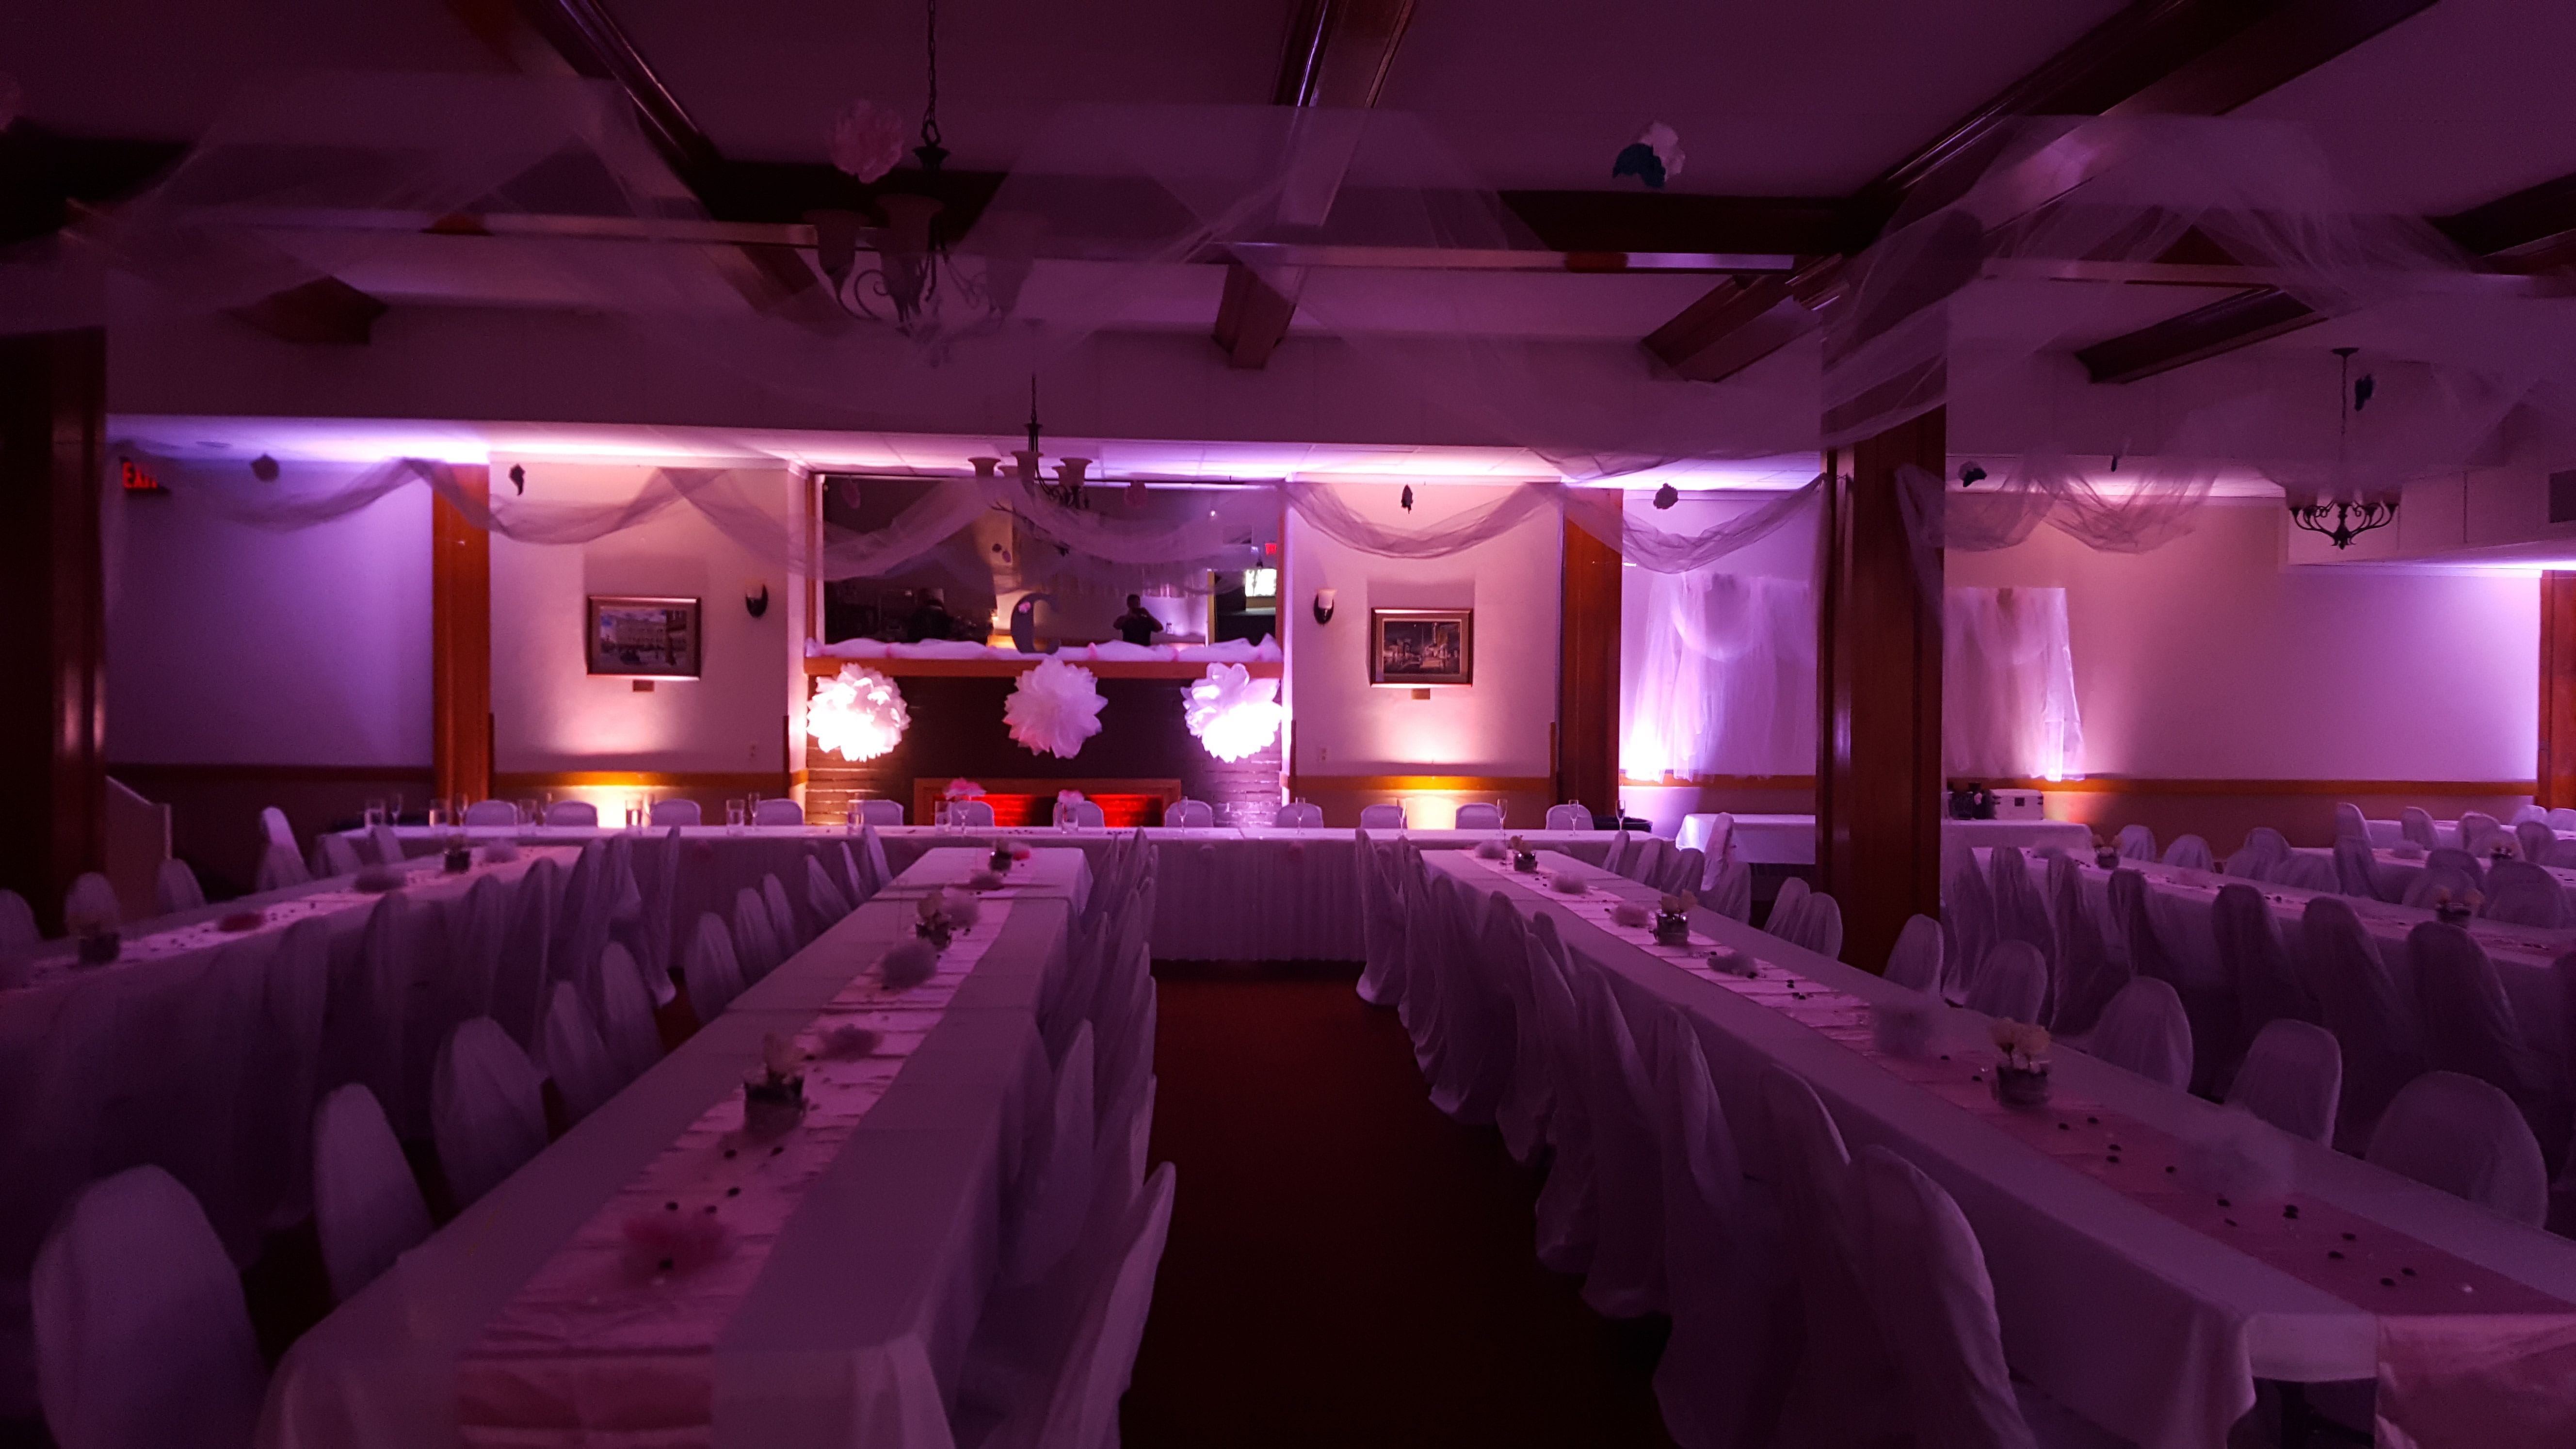 Wedding lighting at the Elks Lodge in Superior. Up lighting in lavender and peach.